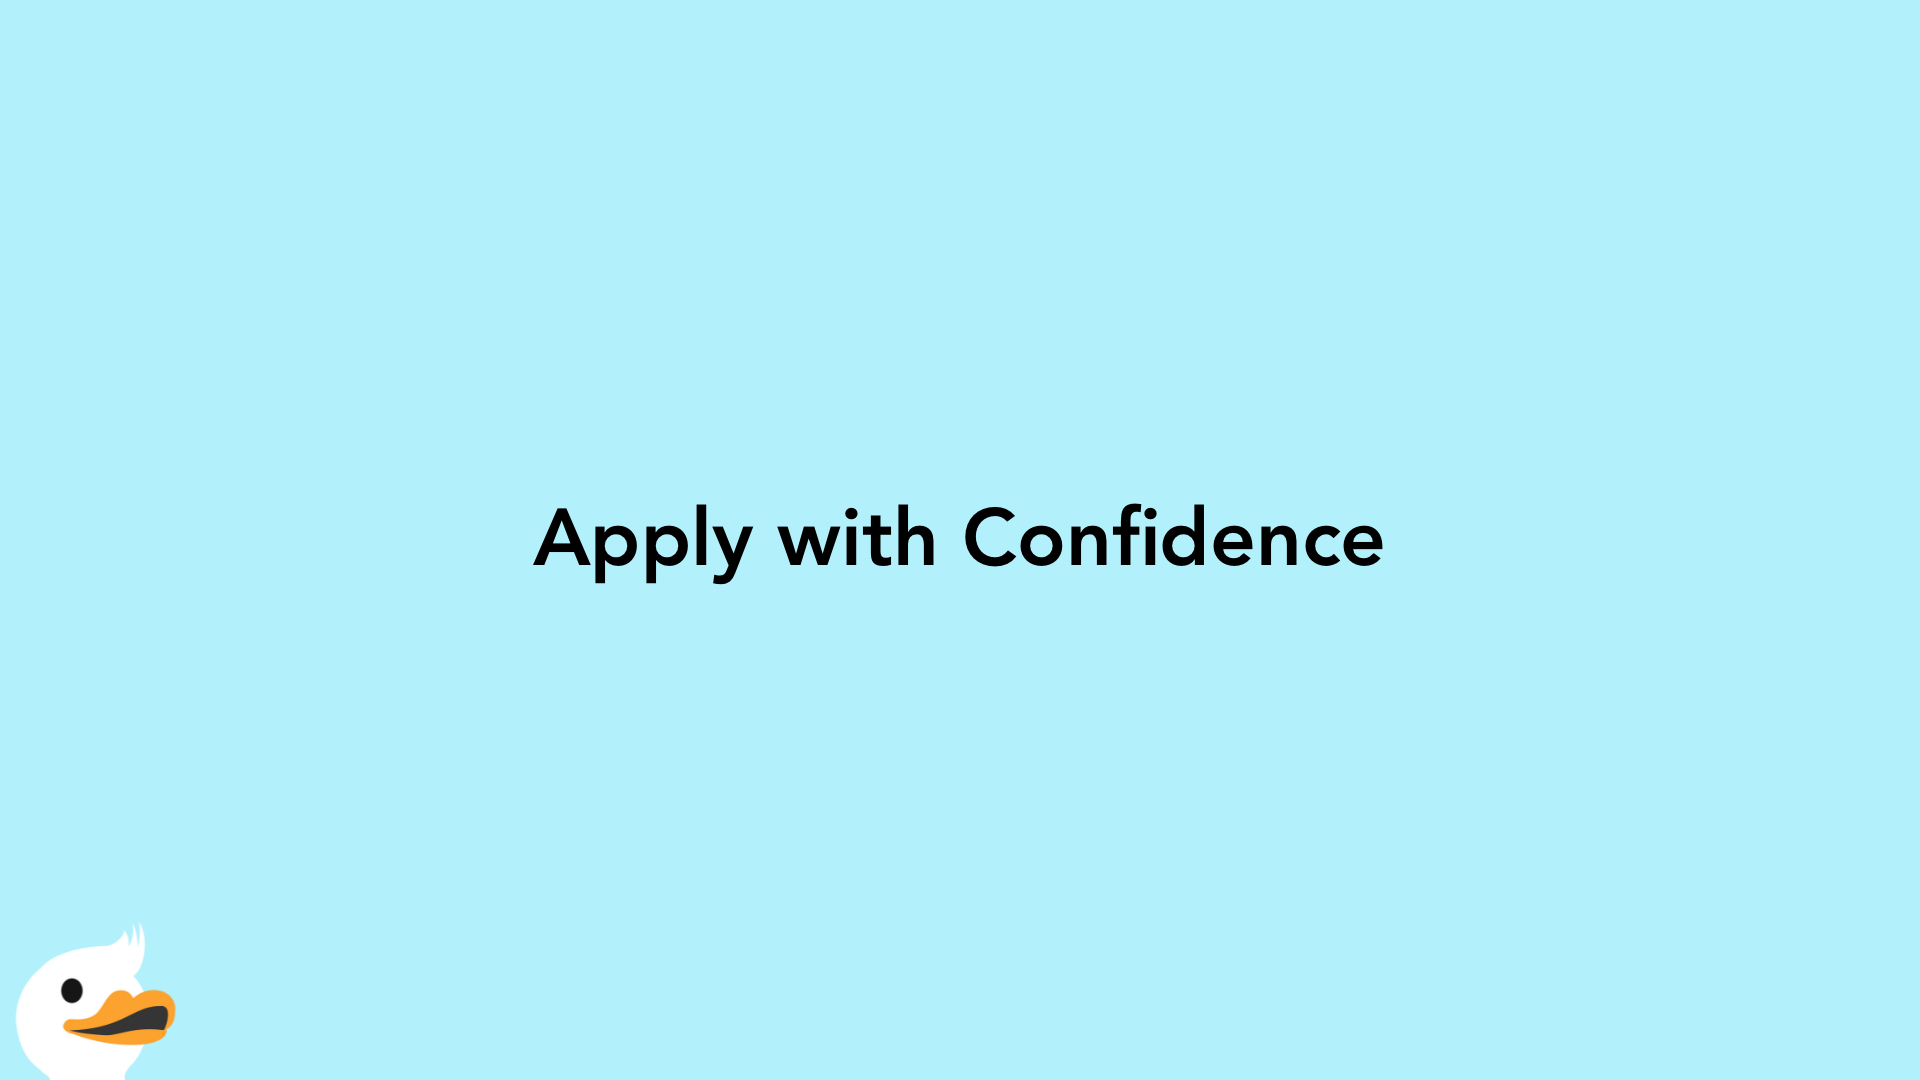 Apply with Confidence